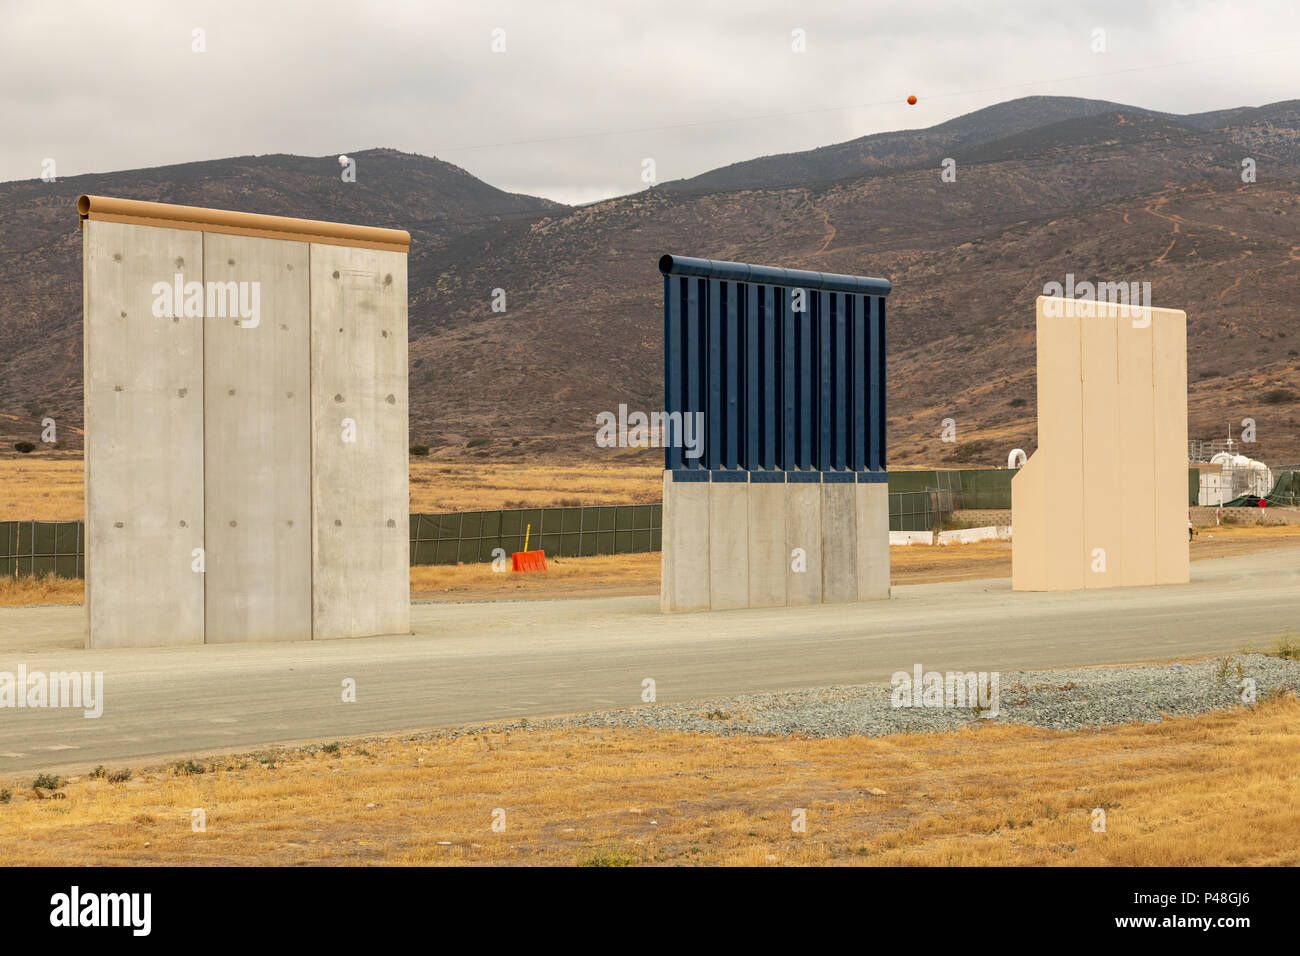 Prototypes of the proposed new Trump wall erected near the Otay Mesa Port of entry in California and Tijuana, Mexico. Stock Photo